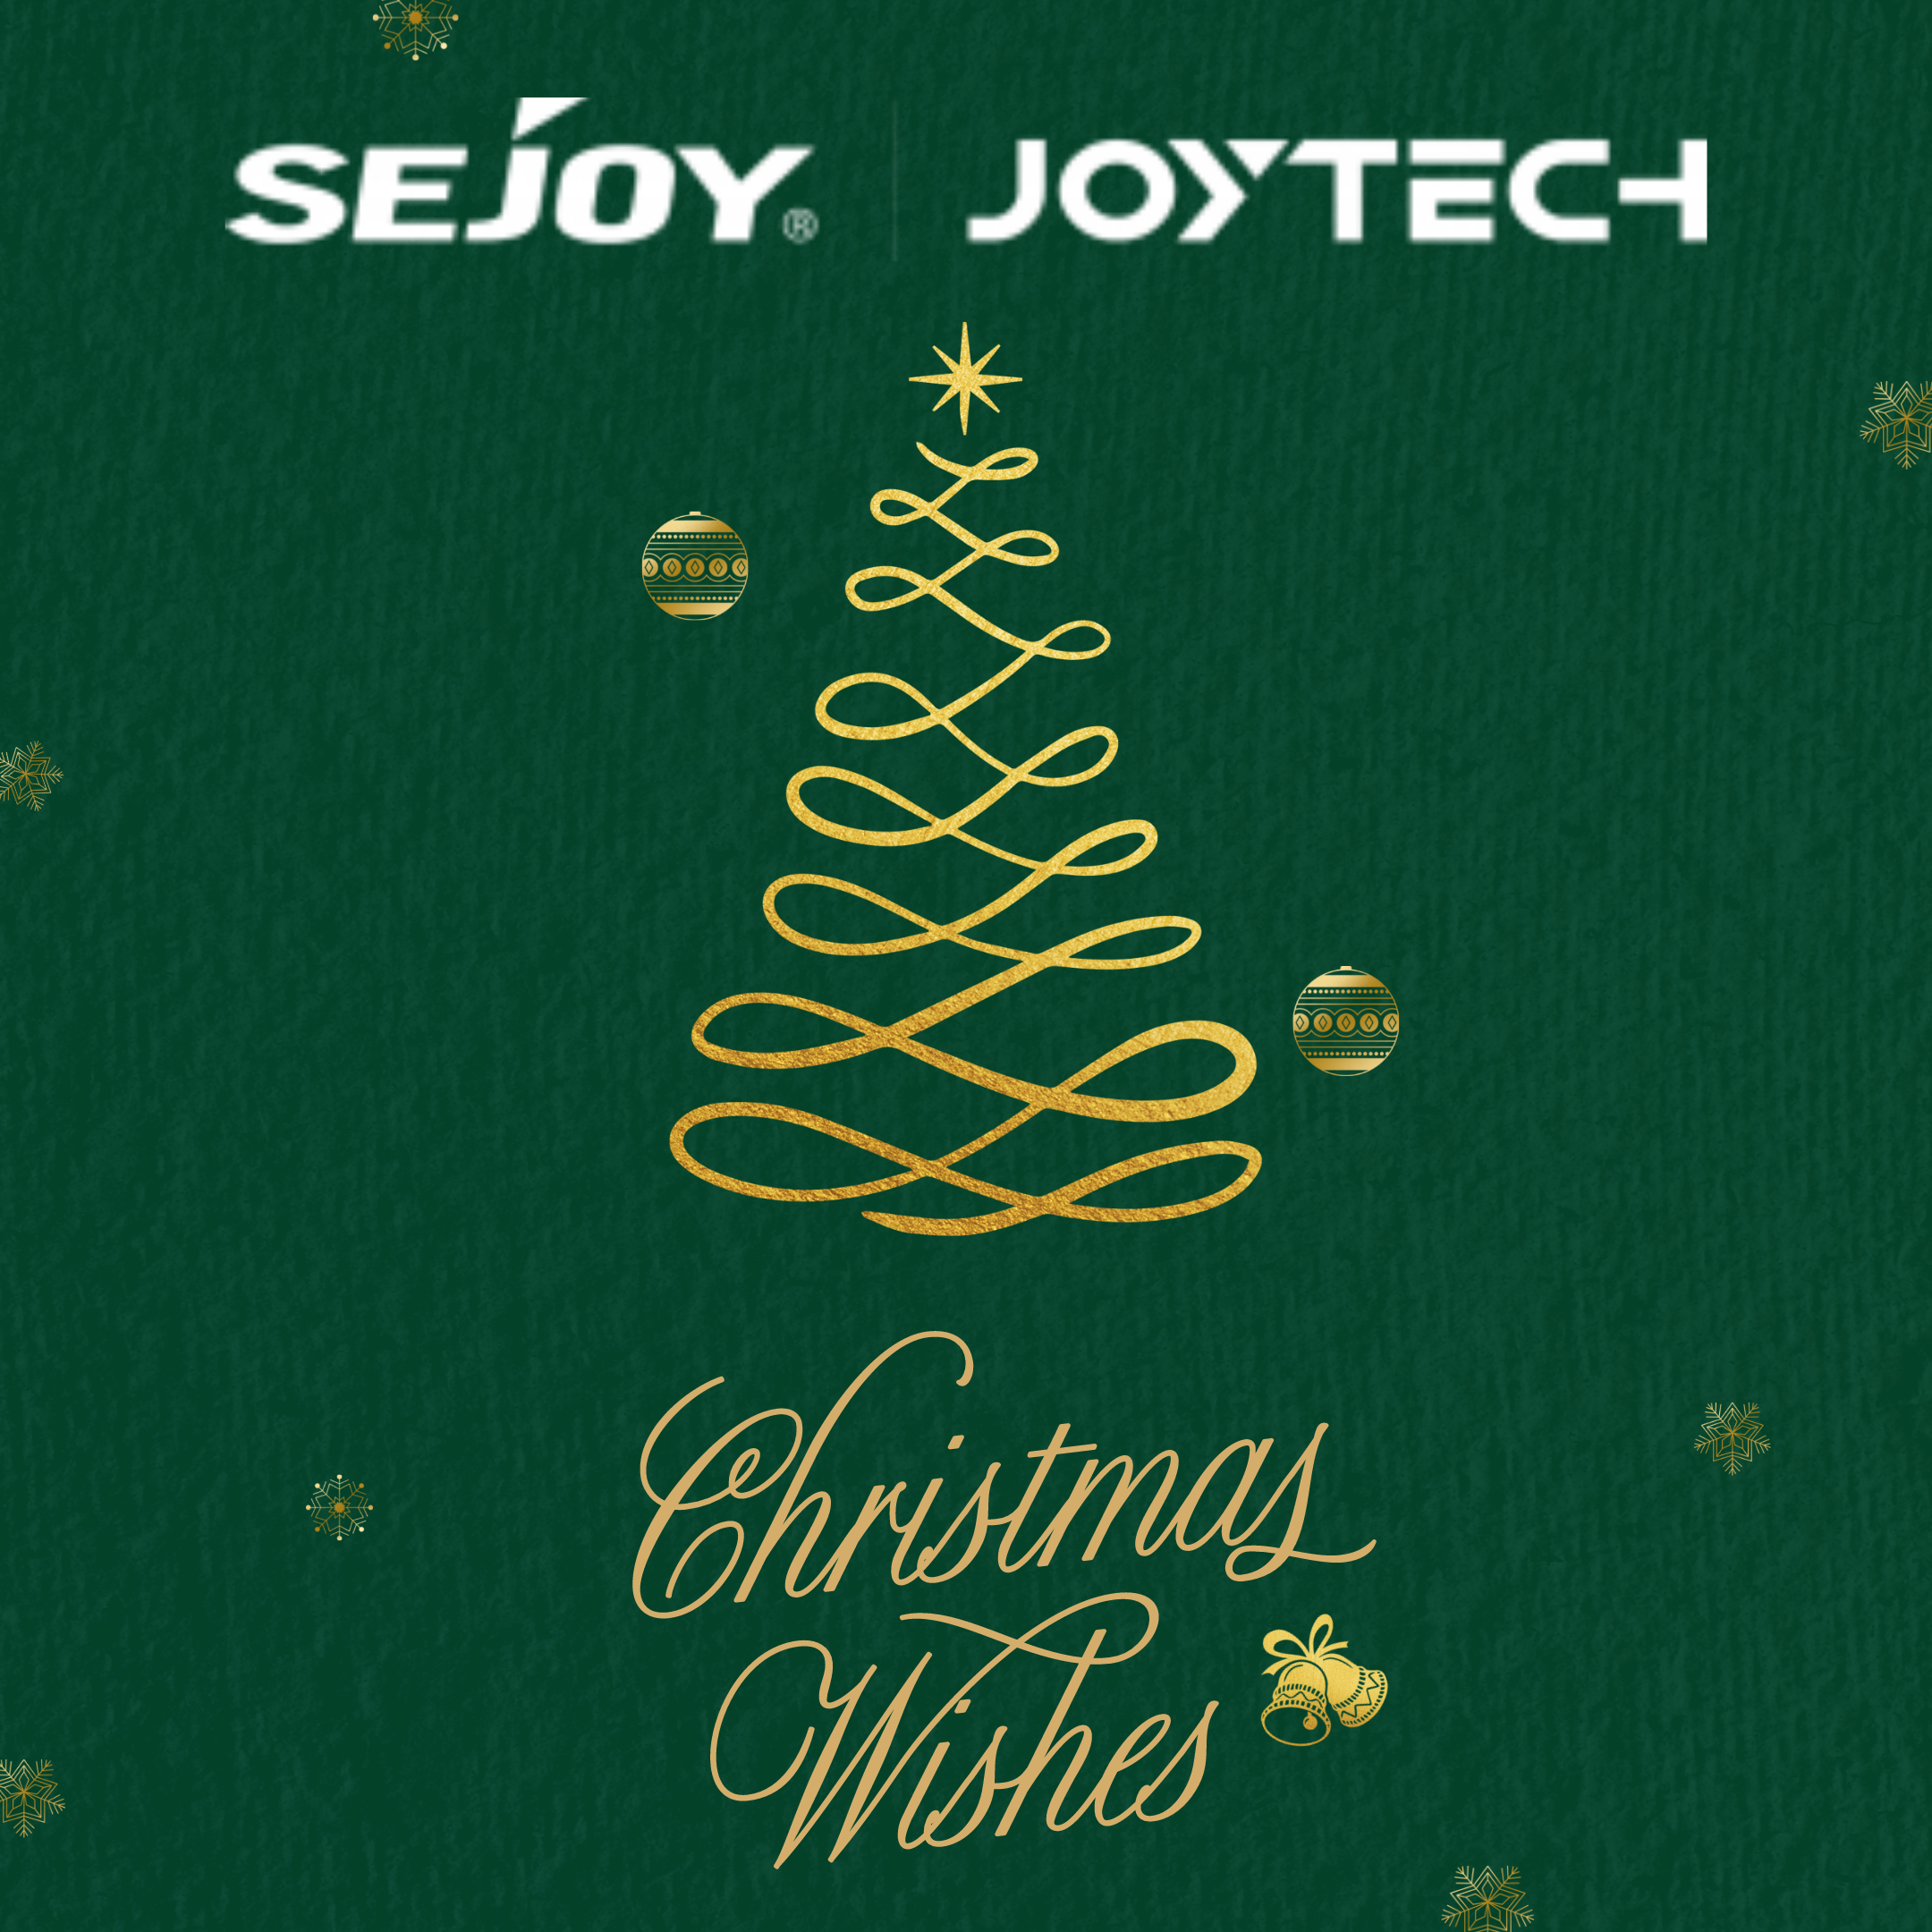 Joytech Wish You Have a Filled Christmas and New Year